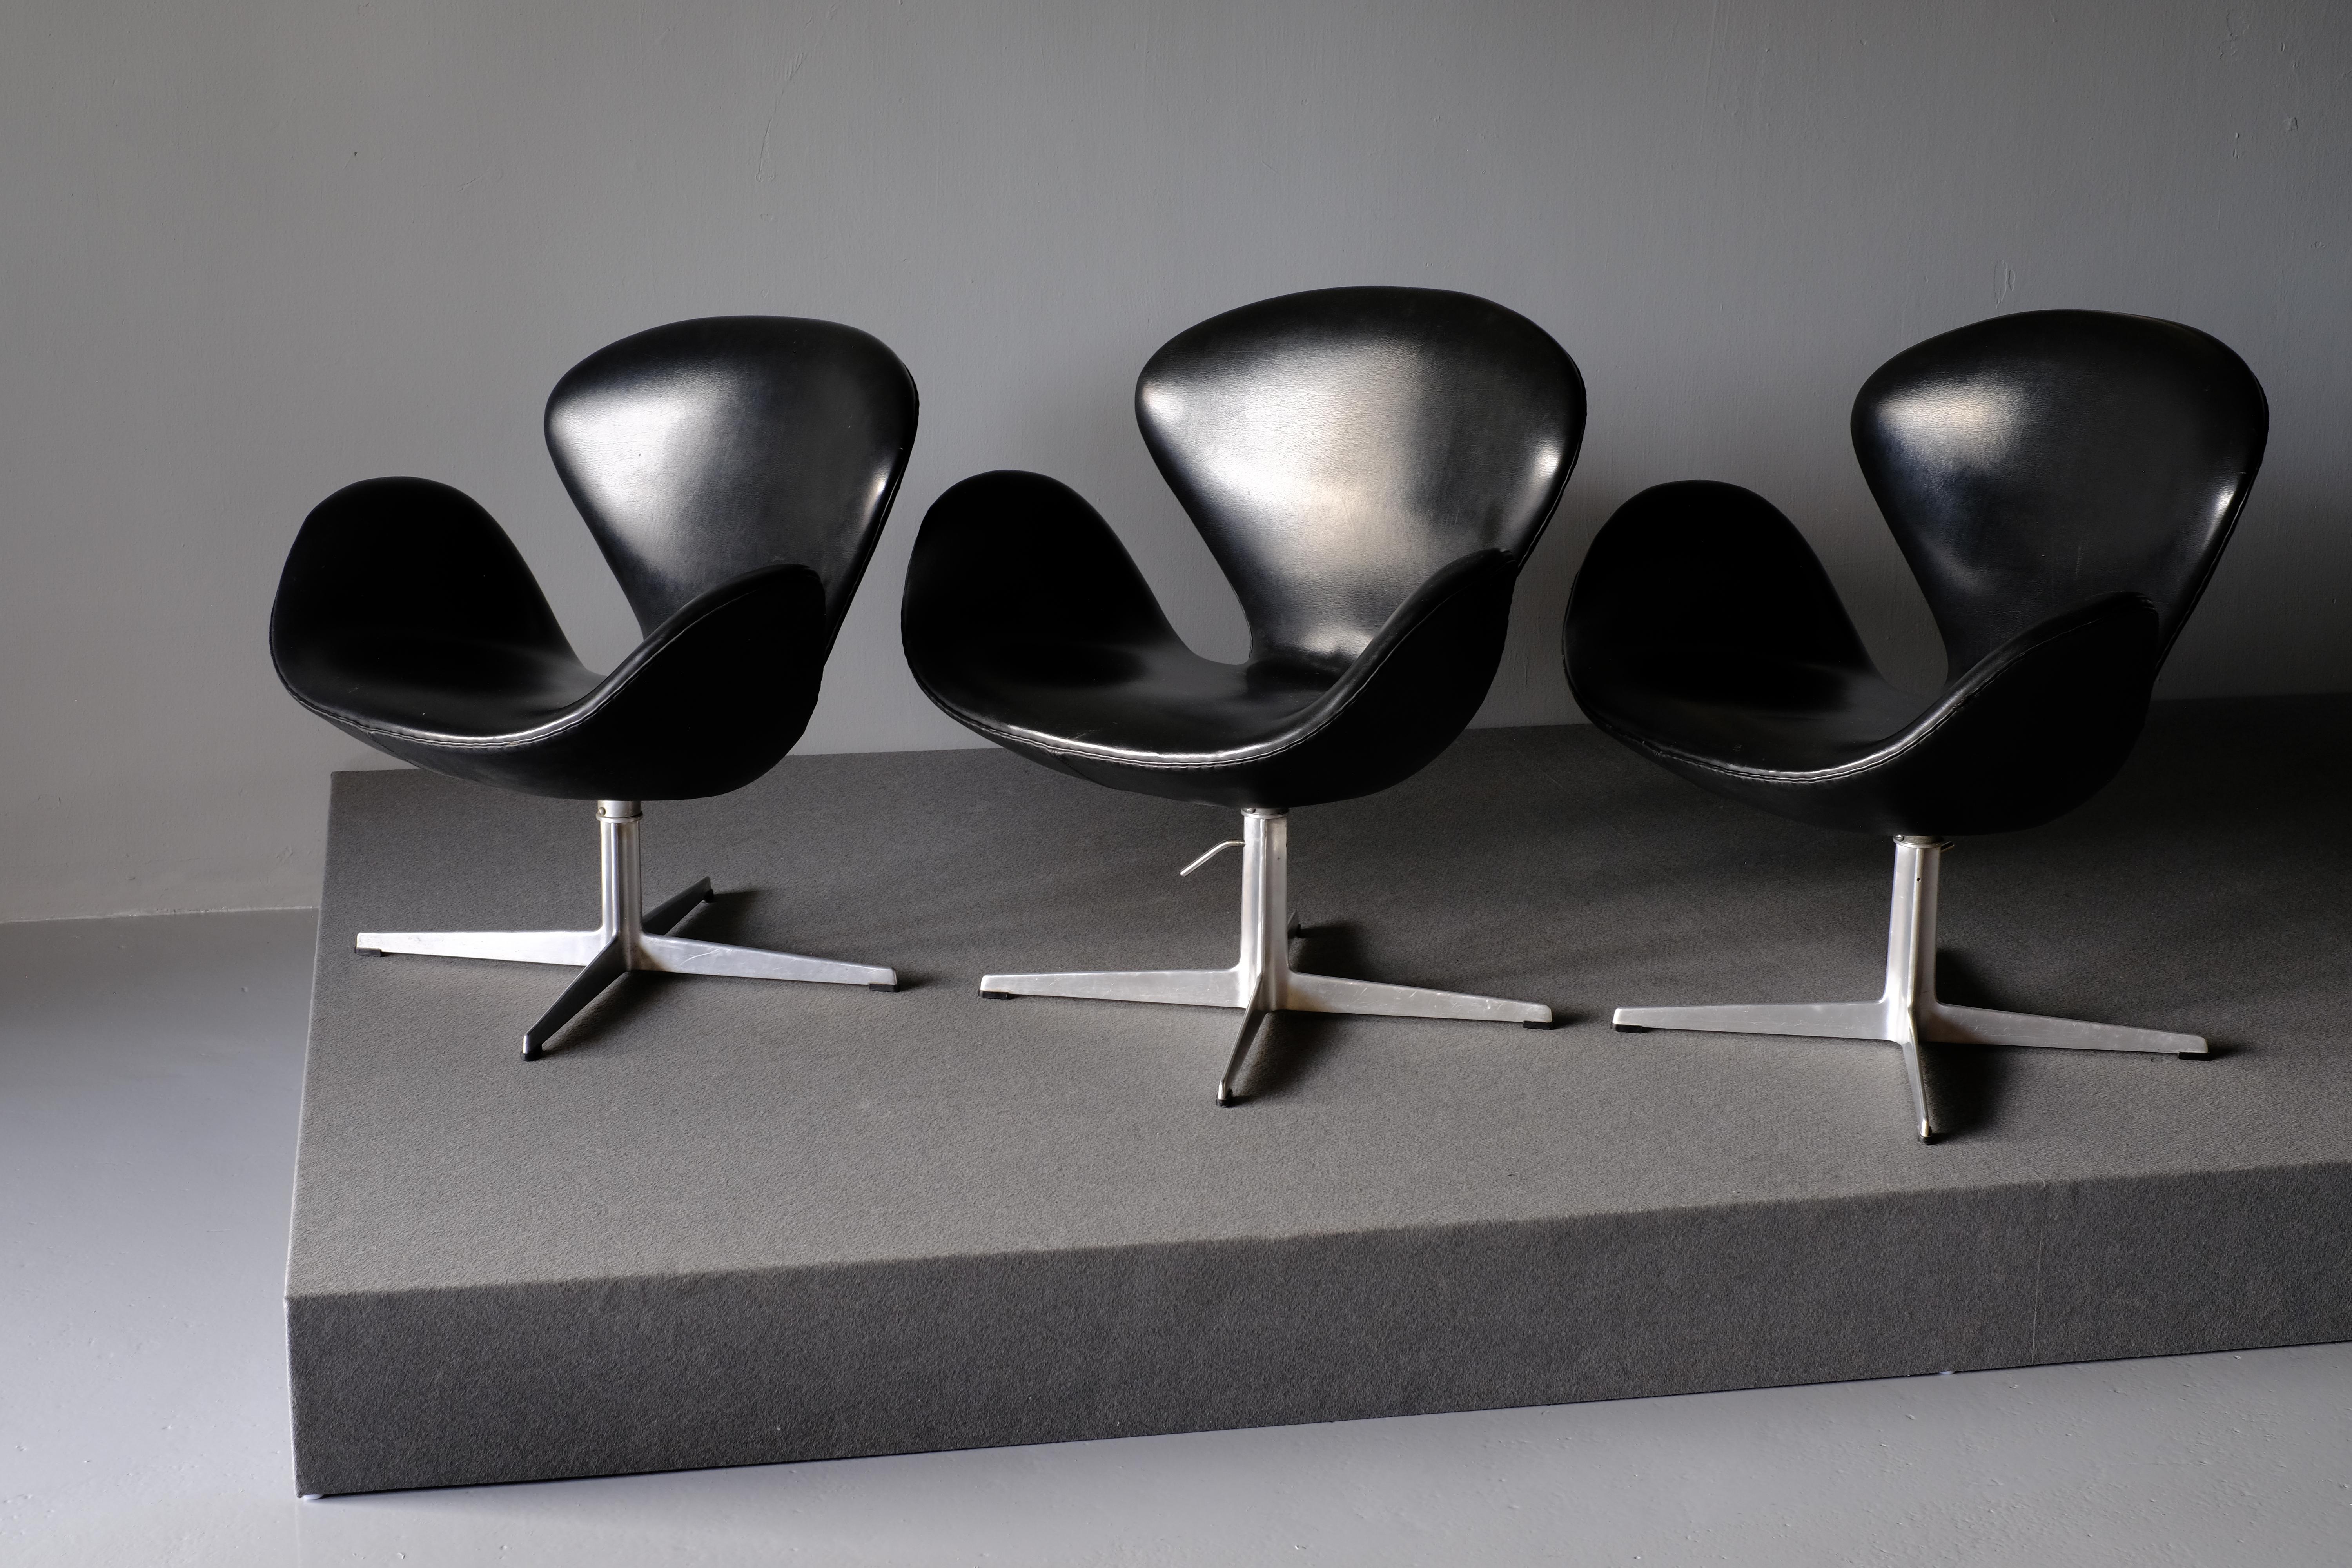 This early example of The Swan lounge chair model 3320 was designed by Arne Jacobsen for the SAS Royal Copenhagen Hotel which opened in 1960. It is produced by Fritz Hansen. It is upholstered in black Skai which is beautifully patinated. It has a